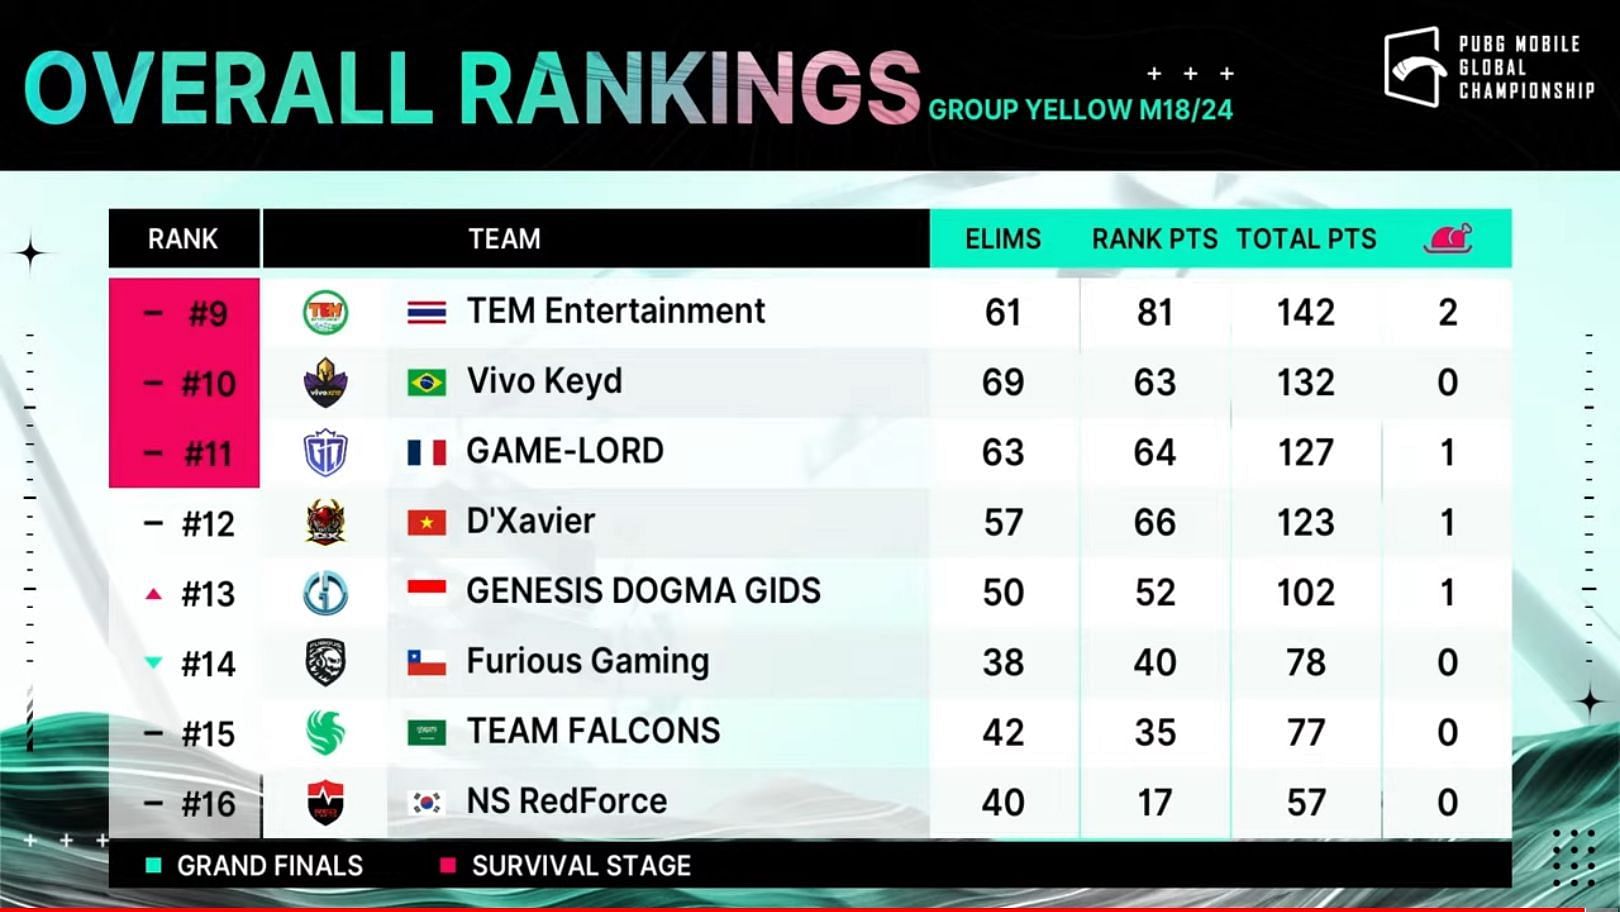 Overall rankings of PMGC Group Yellow after Day 3 (Image via PUBG Mobile)